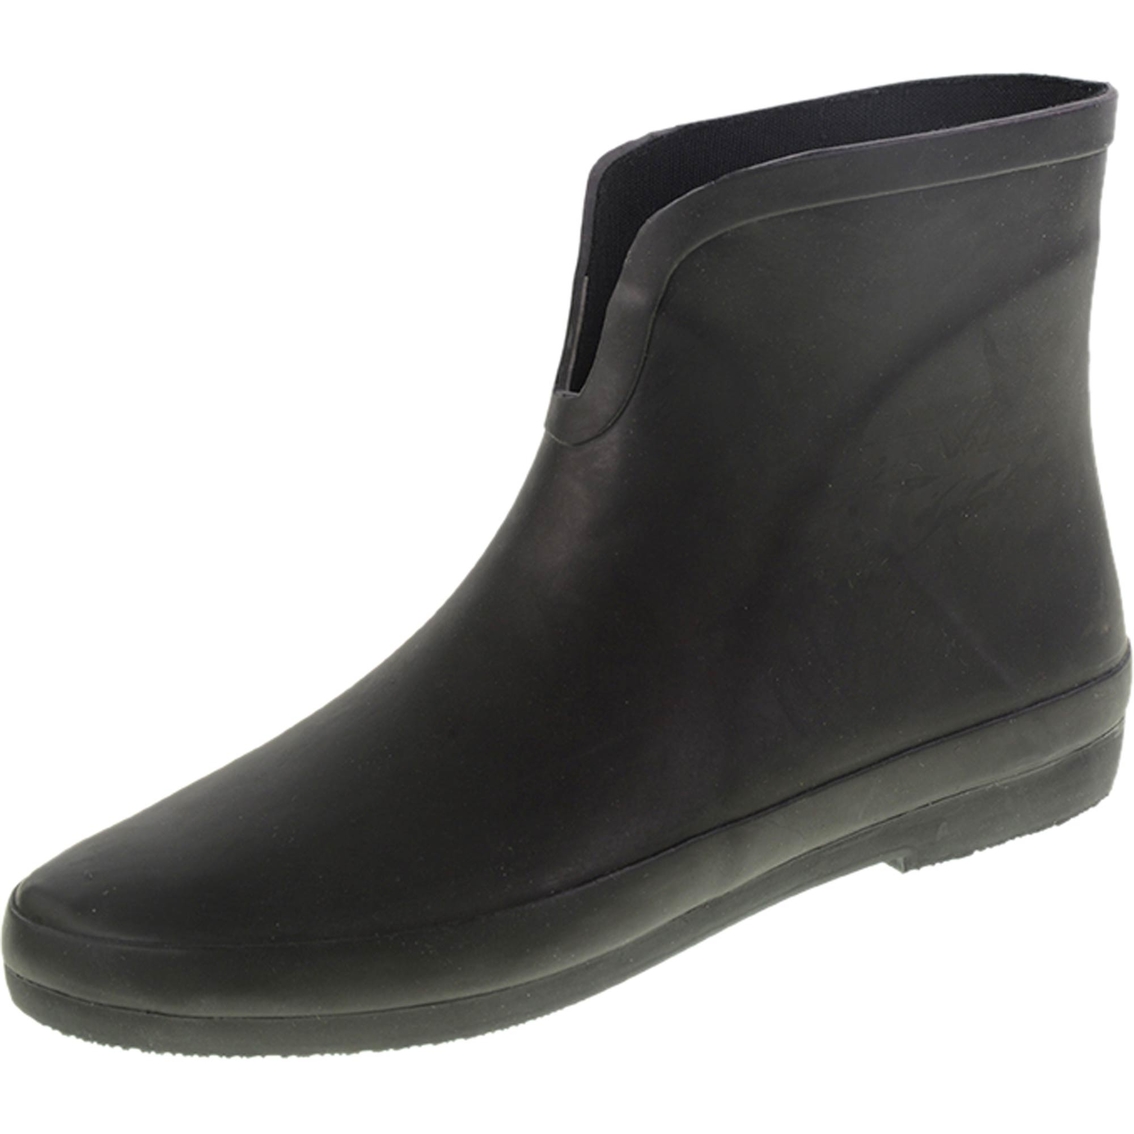 Dirty Laundry Superior Rain Boots | Outdoor | Shoes | Shop The Exchange